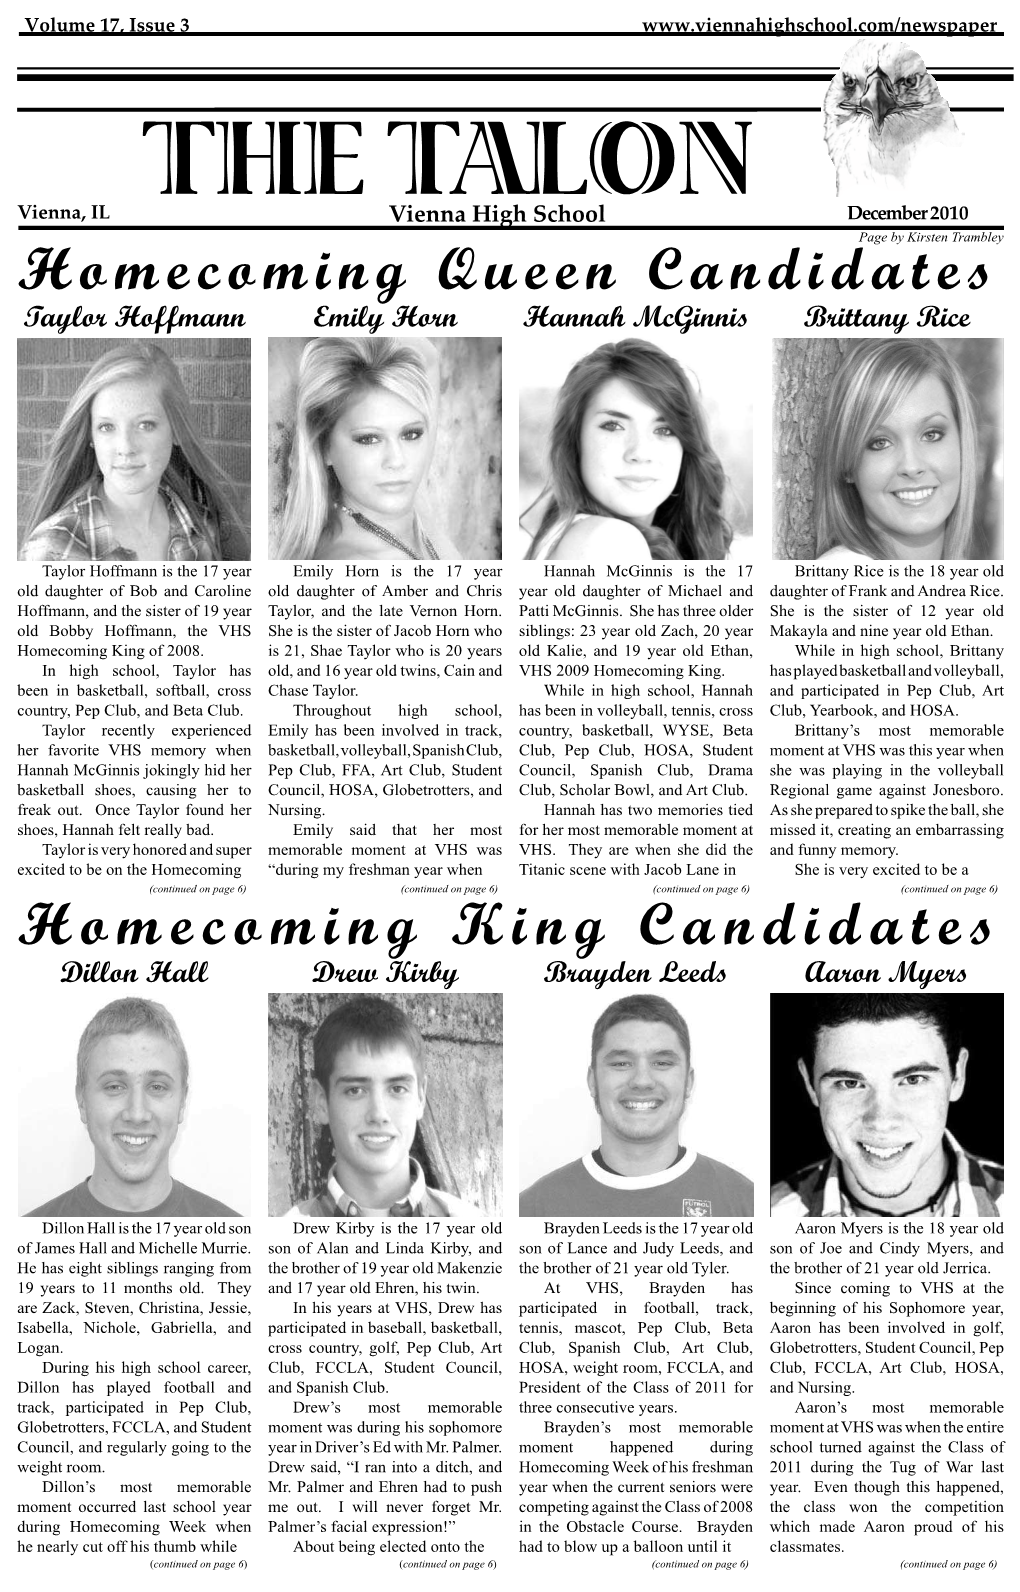 Homecoming Queen Candidates Homecoming King Candidates